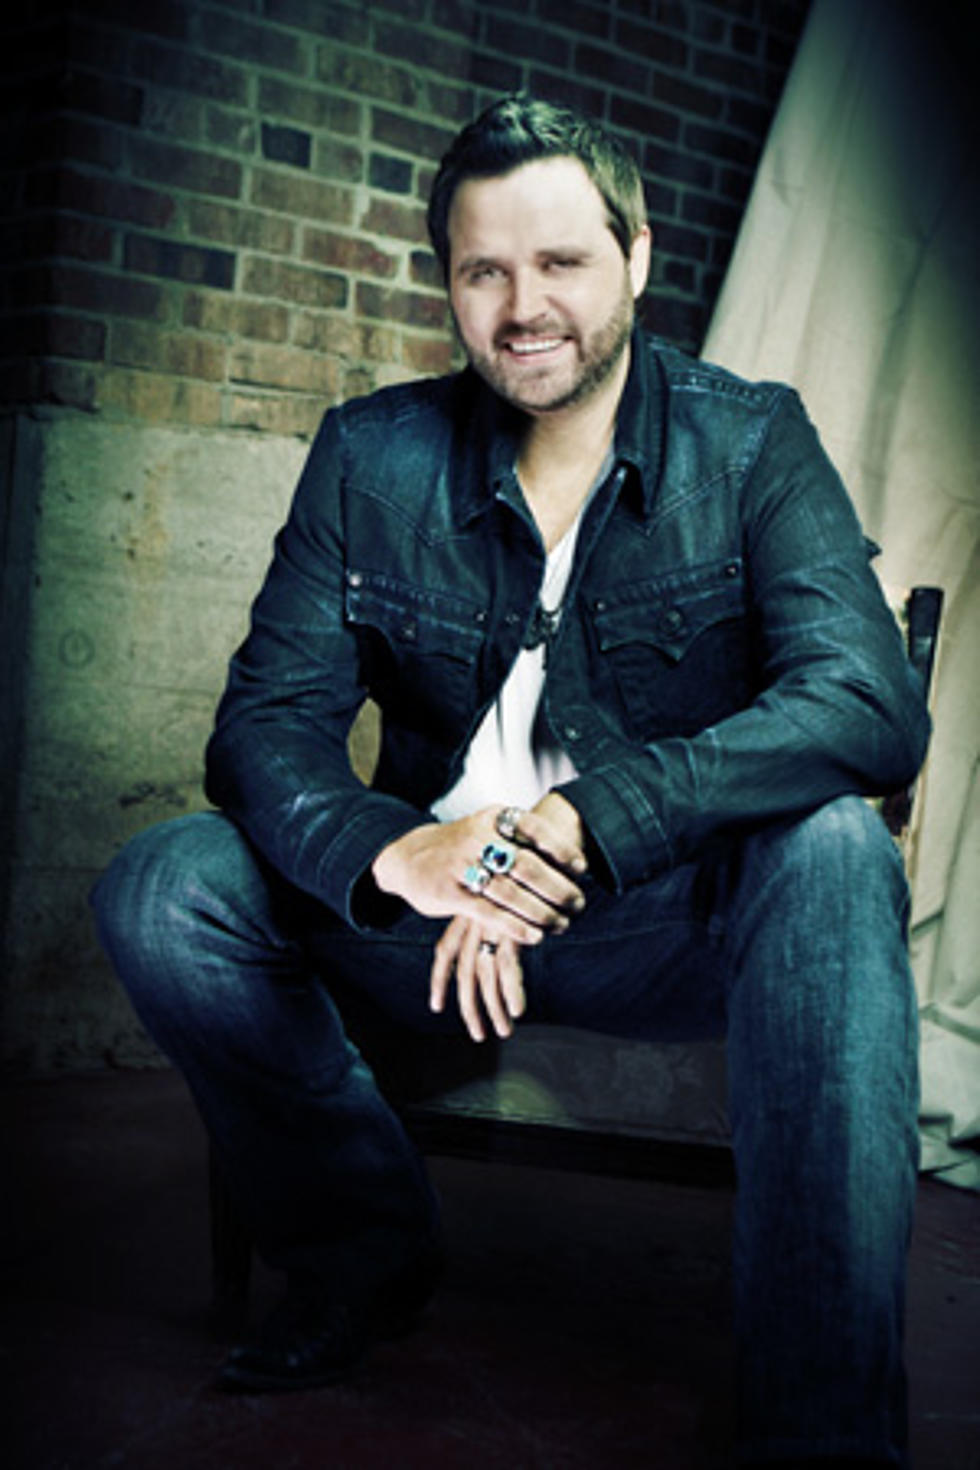 Randy Houser and Wife Welcome New Baby